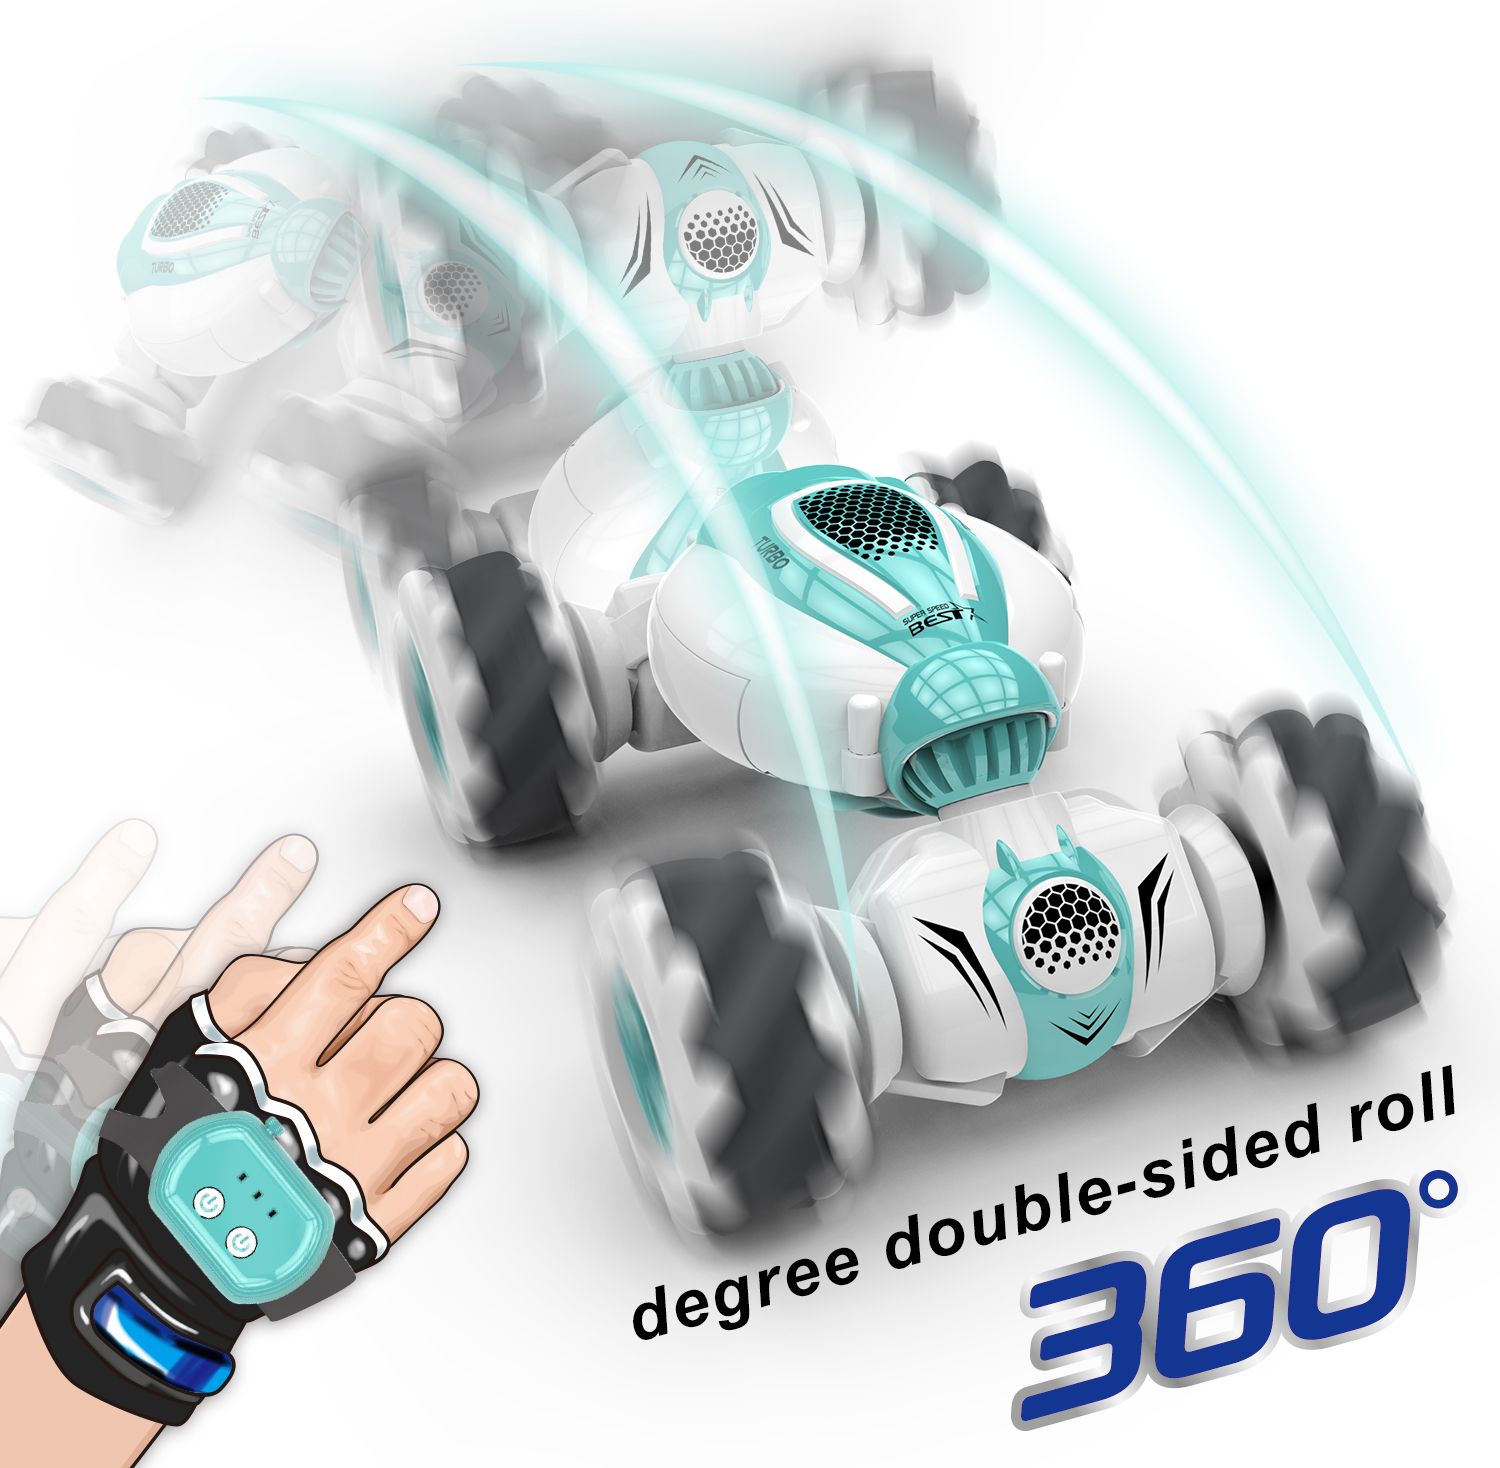 RC Stunt Car for Boys Girls USB Rechargeable Gesture Control Car with Lights Two Sided 360°Rotate Tumble Vehicle Global-Store Gesture Sensing Remote Control Car 2.4 GHZ RC Cars 